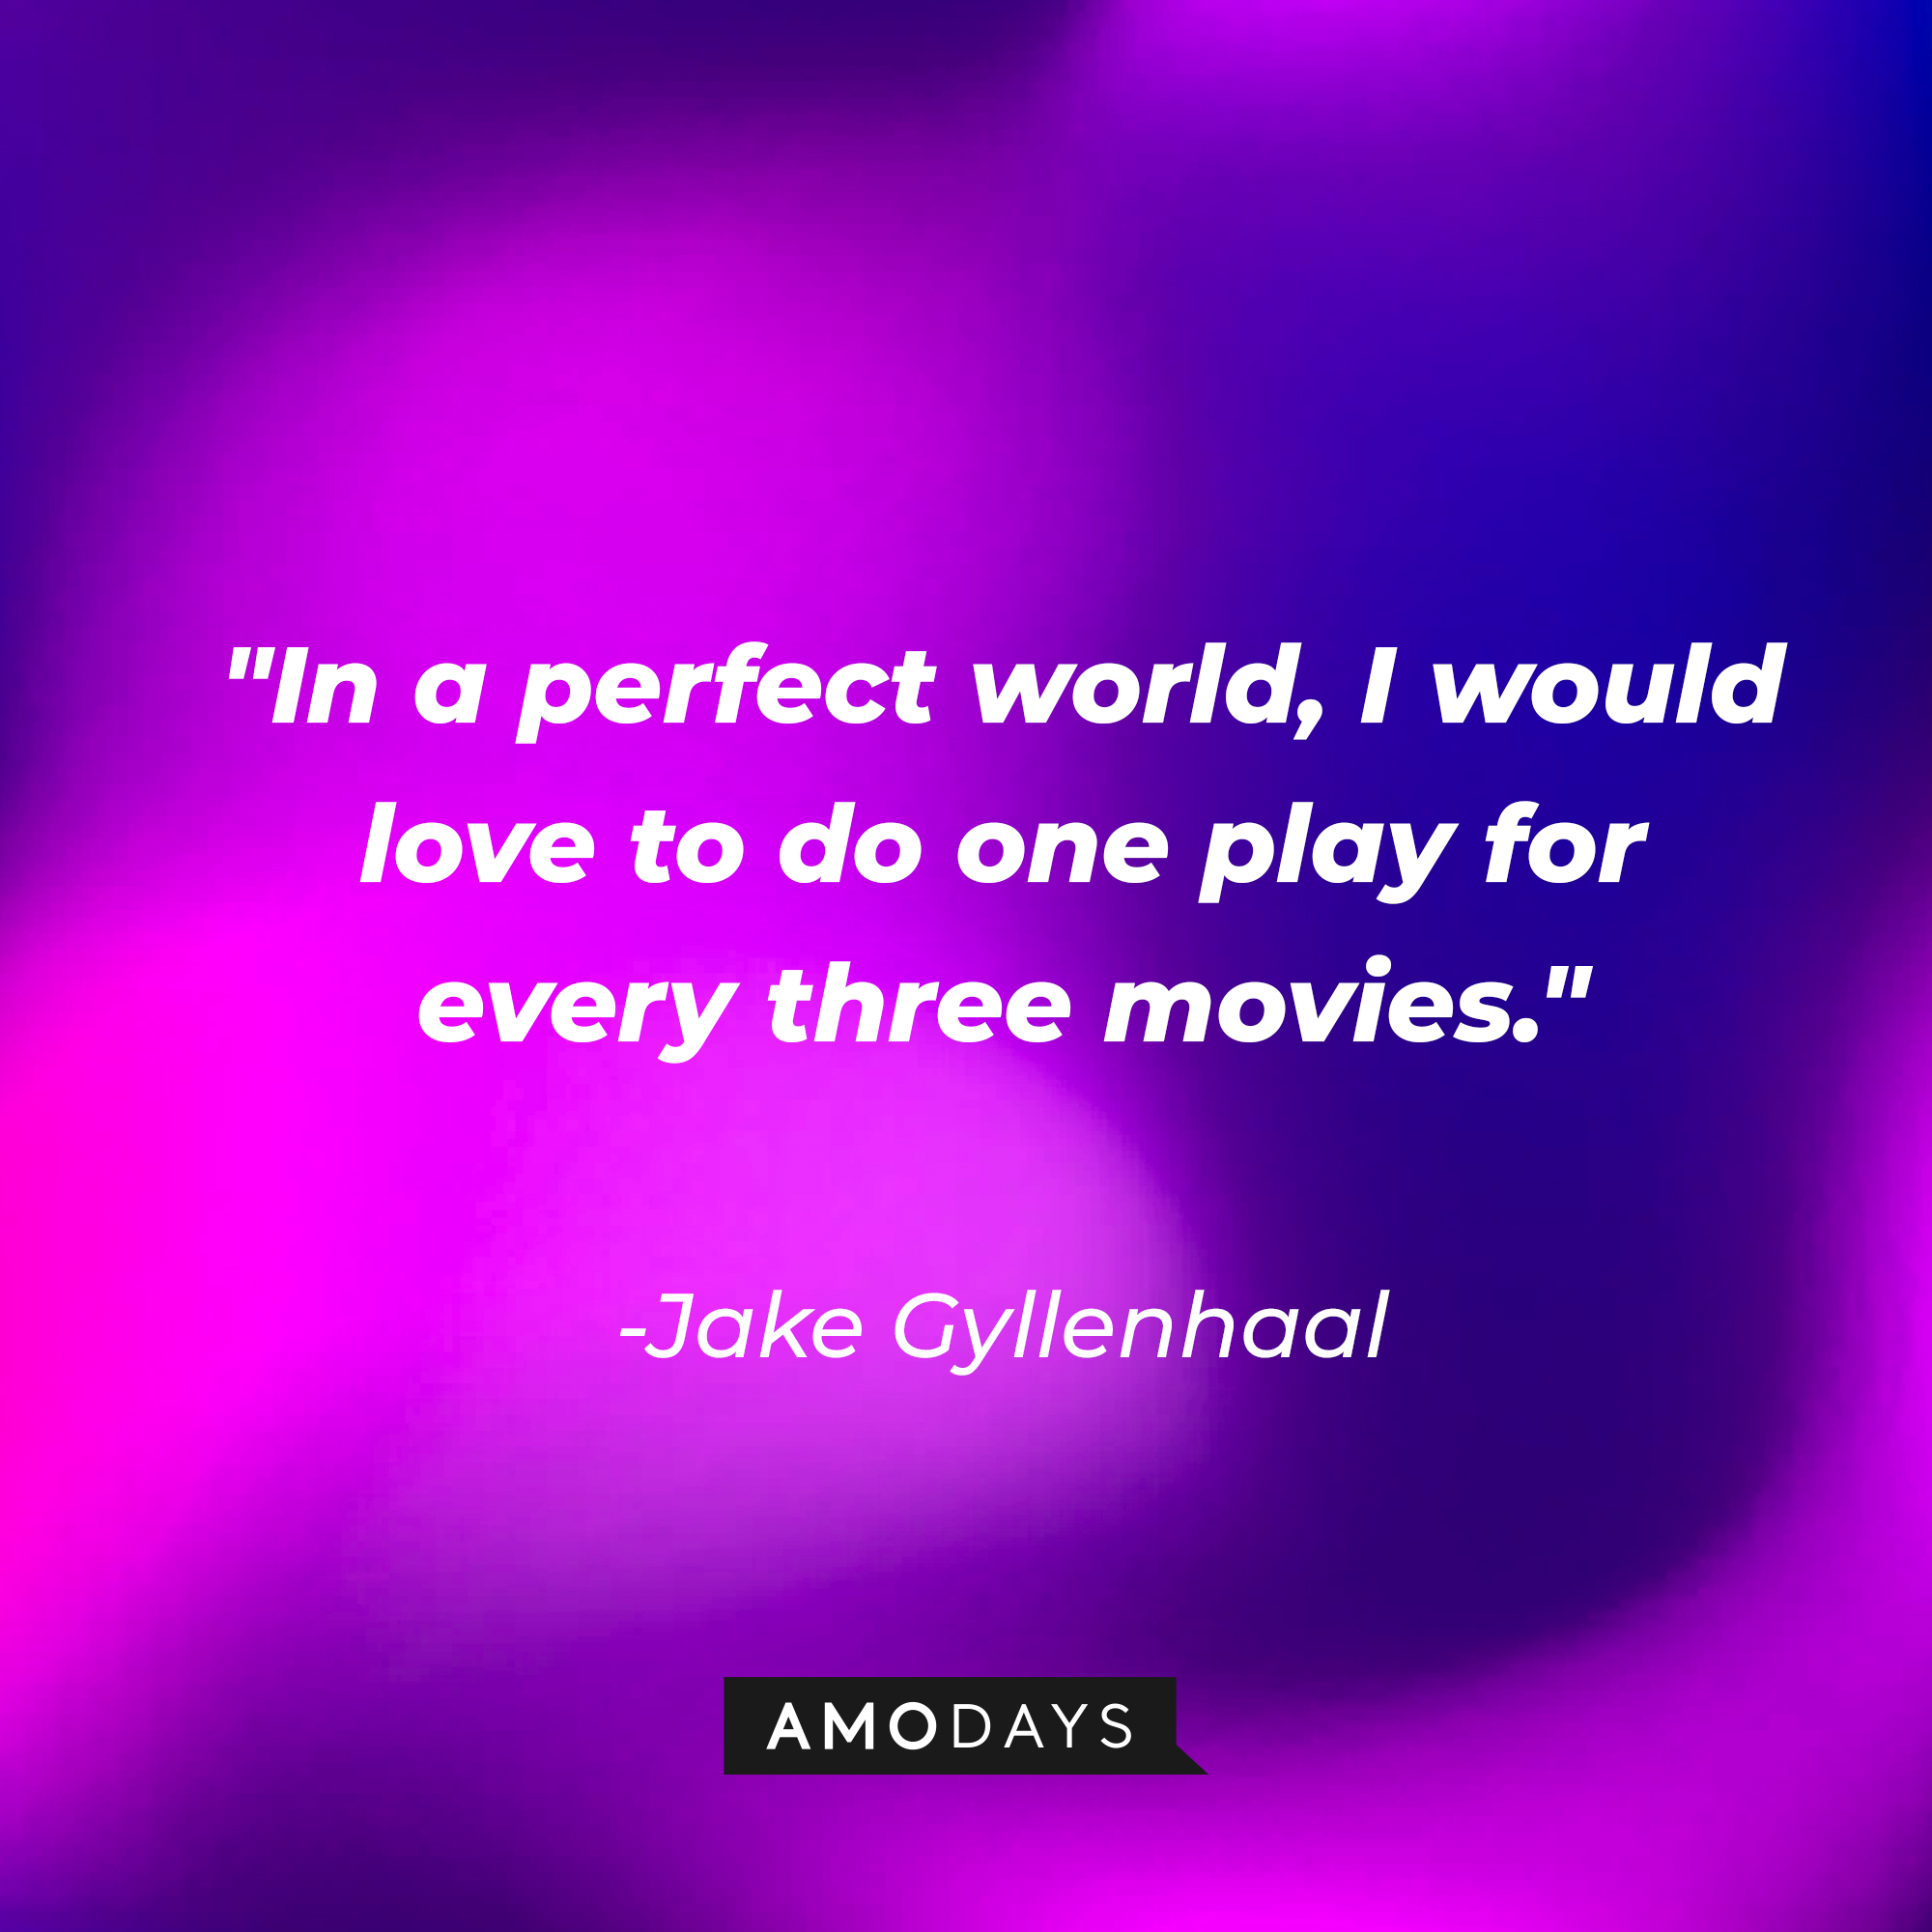 Jake Gyllenhaal's quote: "In a perfect world, I would love to do one play for every three movies." | Source: AmoDays